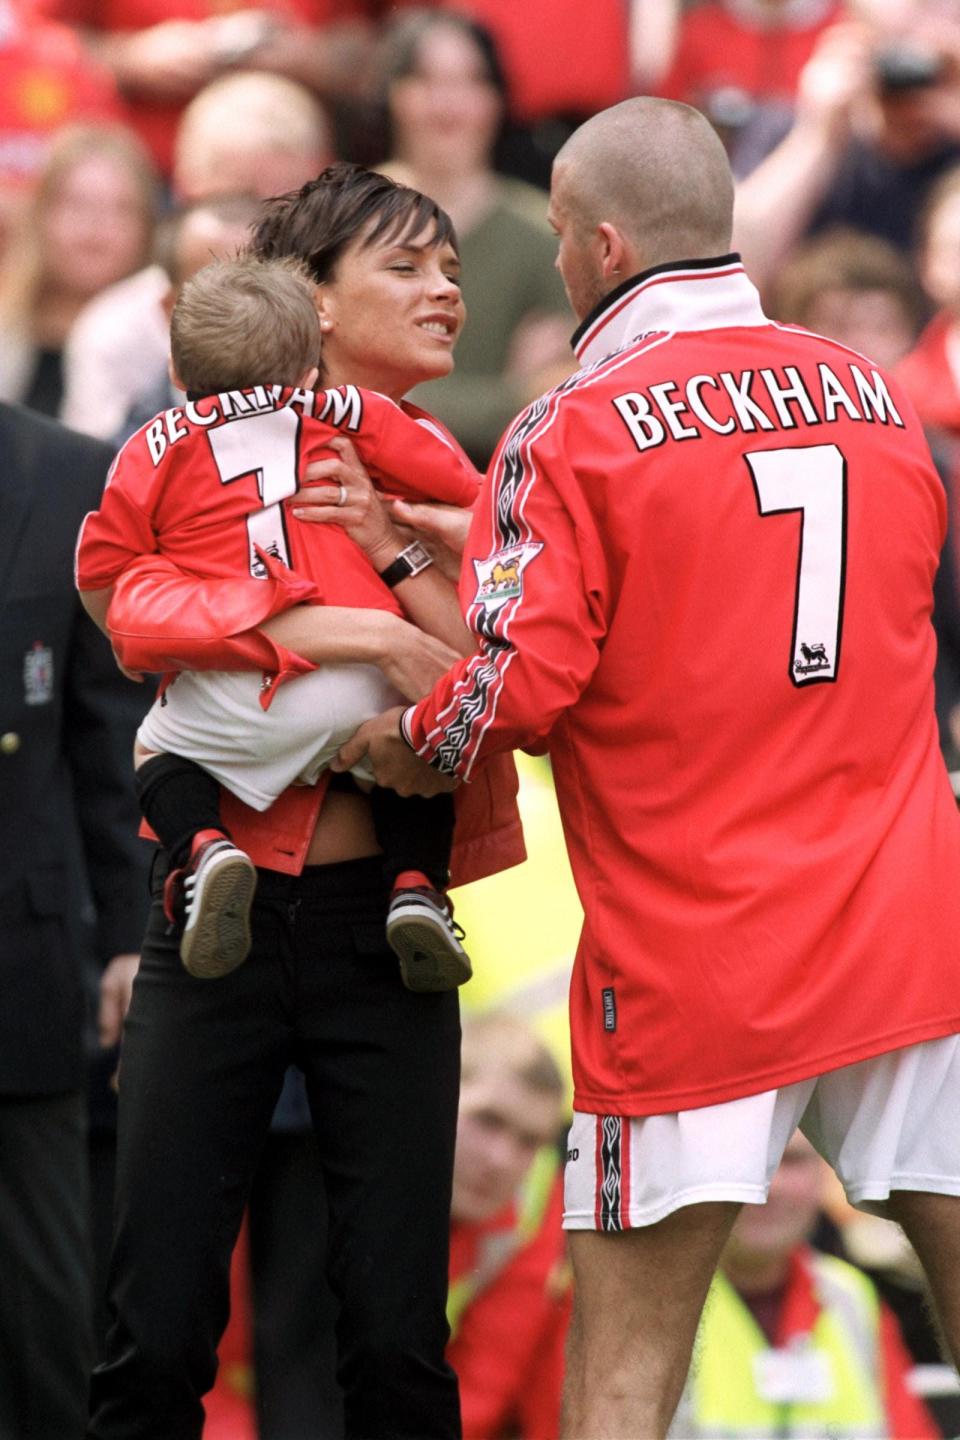 David Beckham and Victoria Beckham with their son Brooklyn in 2000.